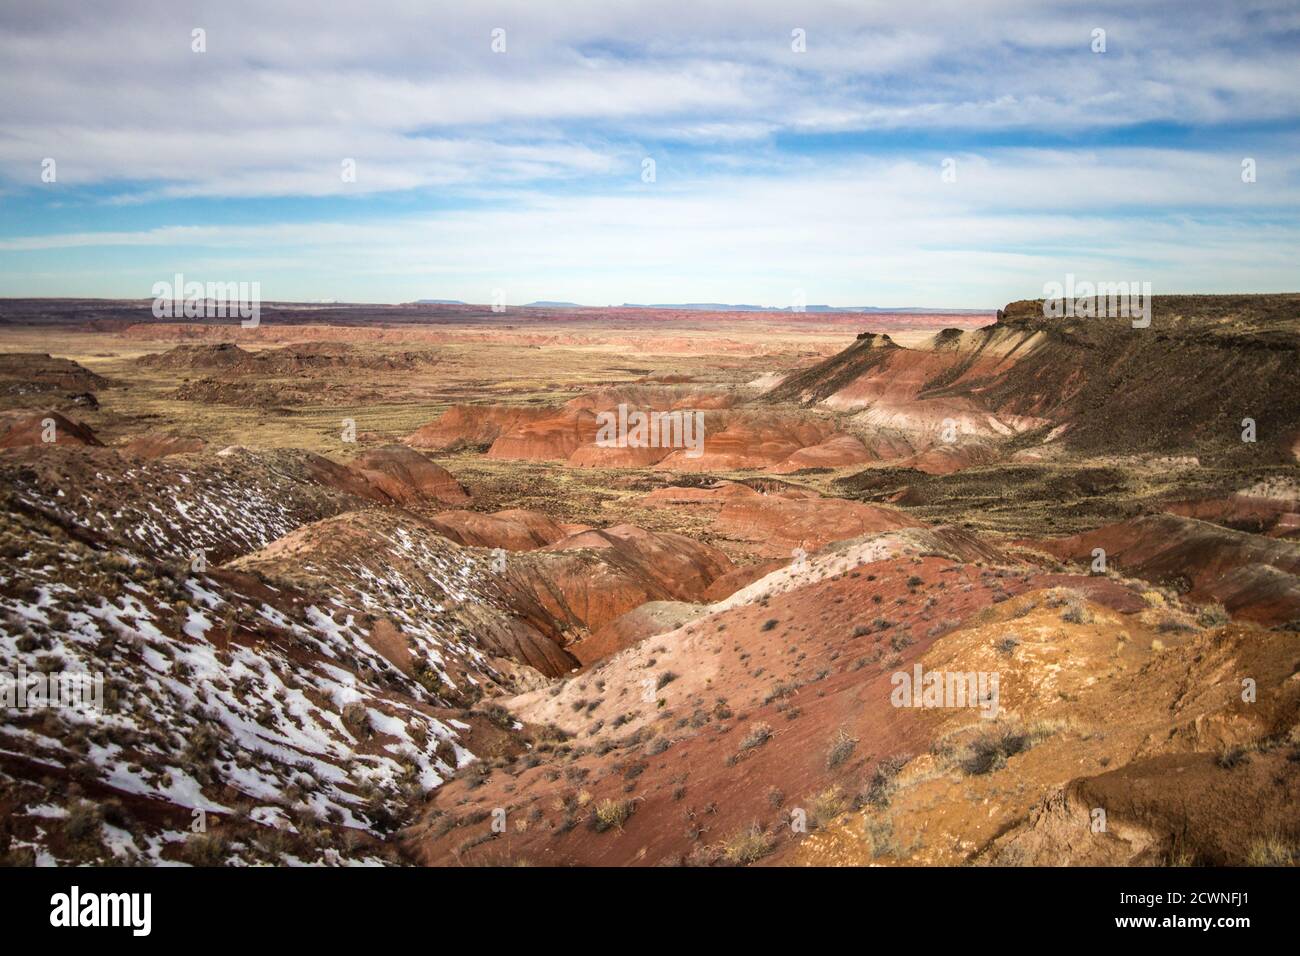 Winter In The Desert. Light dusting of snow at an overlook in the Painted Desert National Park near Holbrook, Arizona. Stock Photo